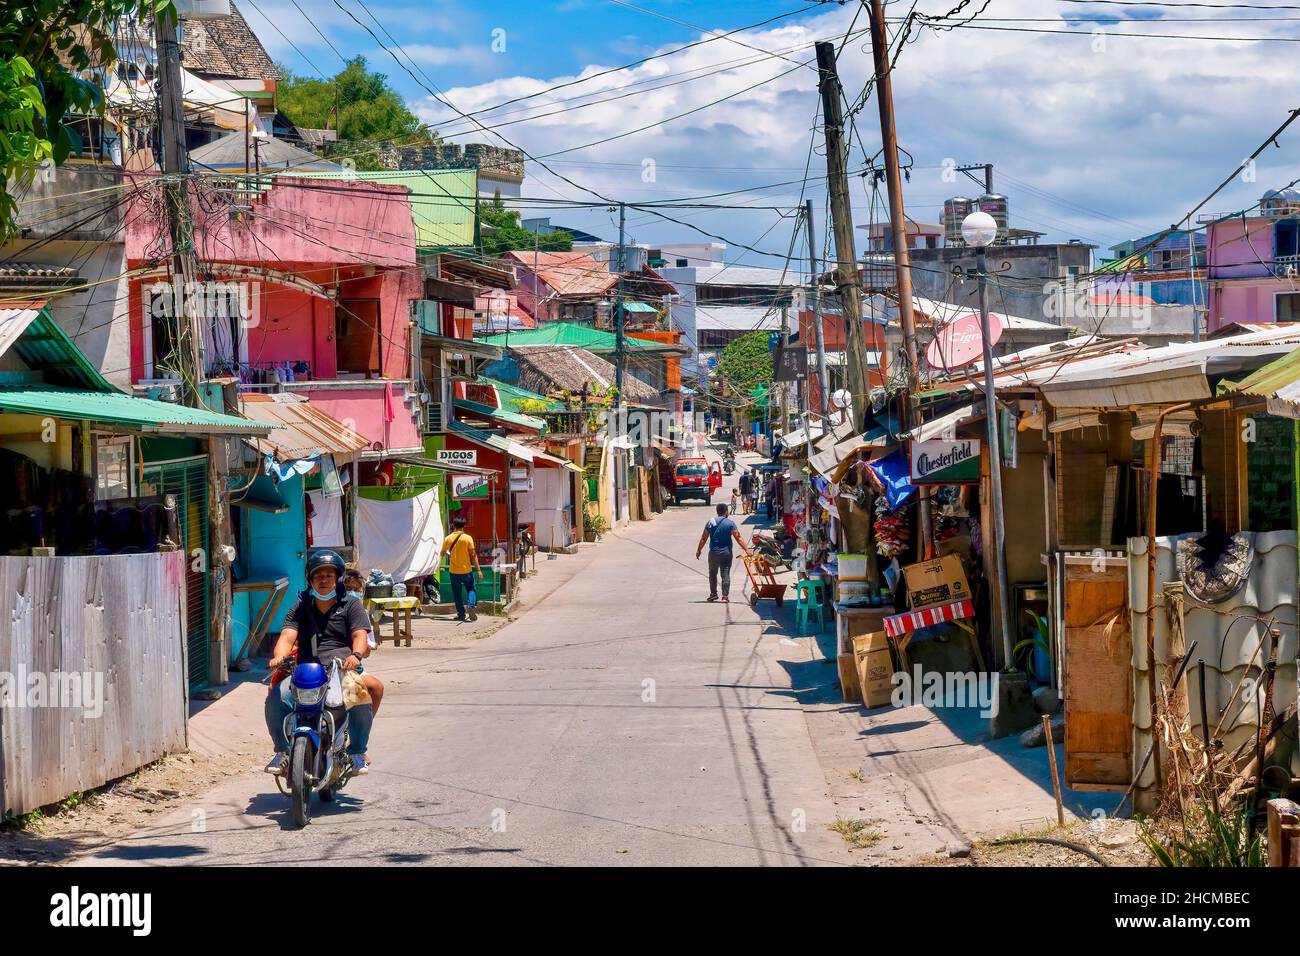 Sabang Village, Puerto Galera, Philippines - May 4, 2021: View of the uncrowded market street in a small resort community located on Mindoro Island. Stock Photo